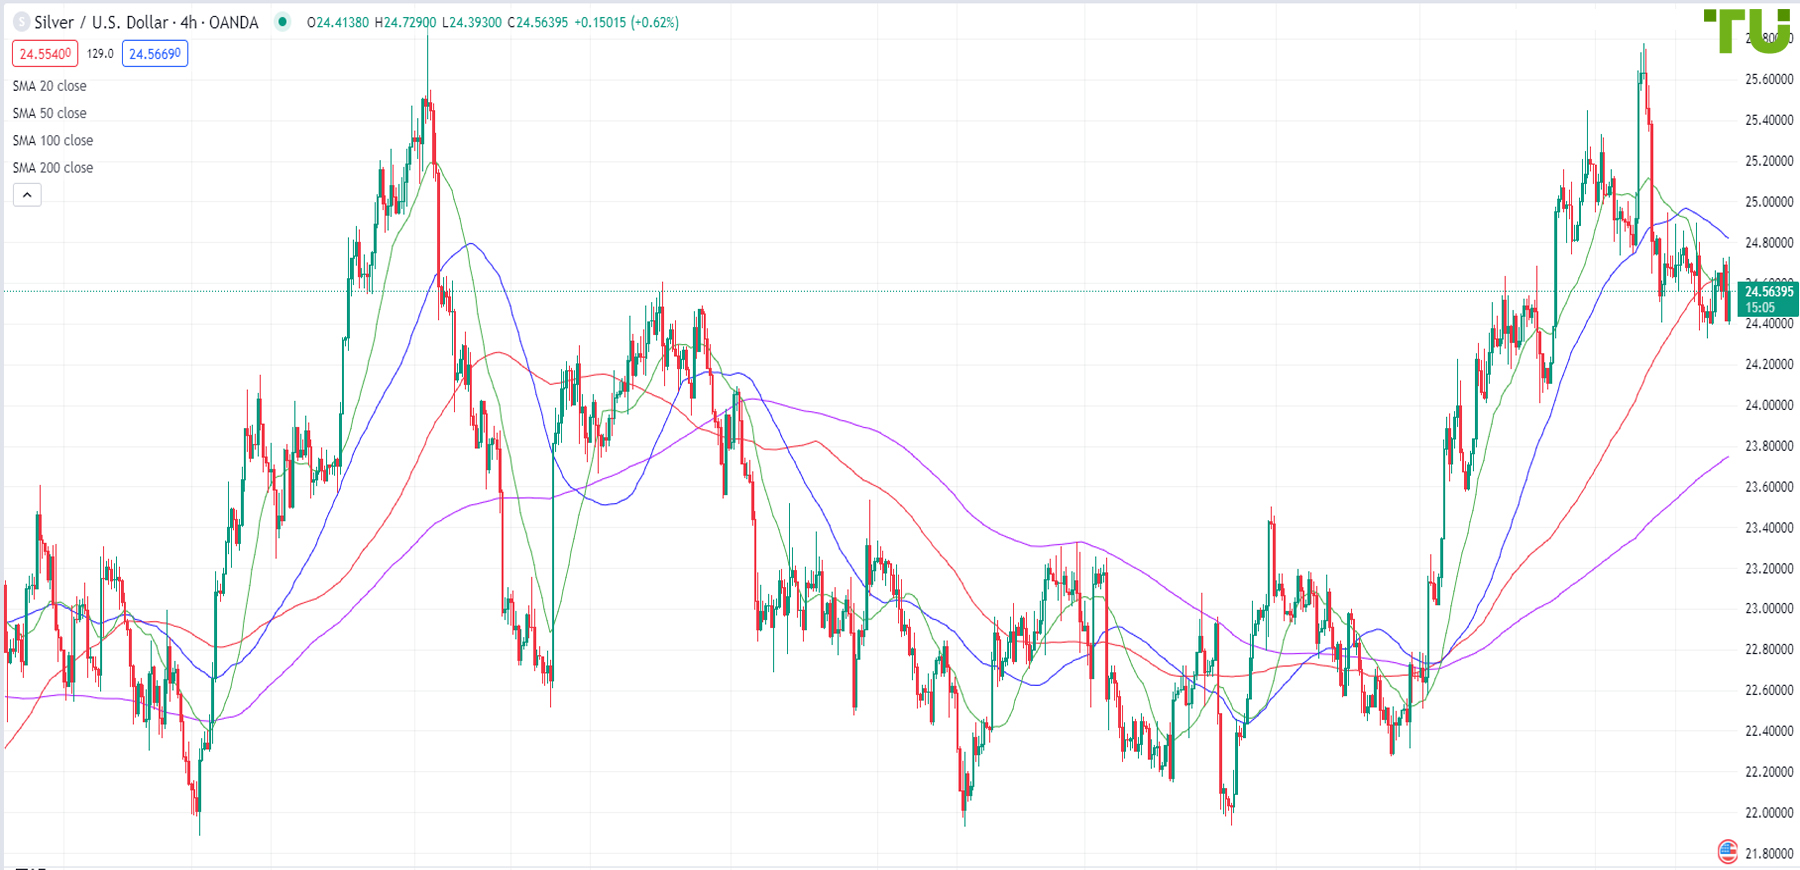 XAG/USD is under pressure, but growth following gold is possible